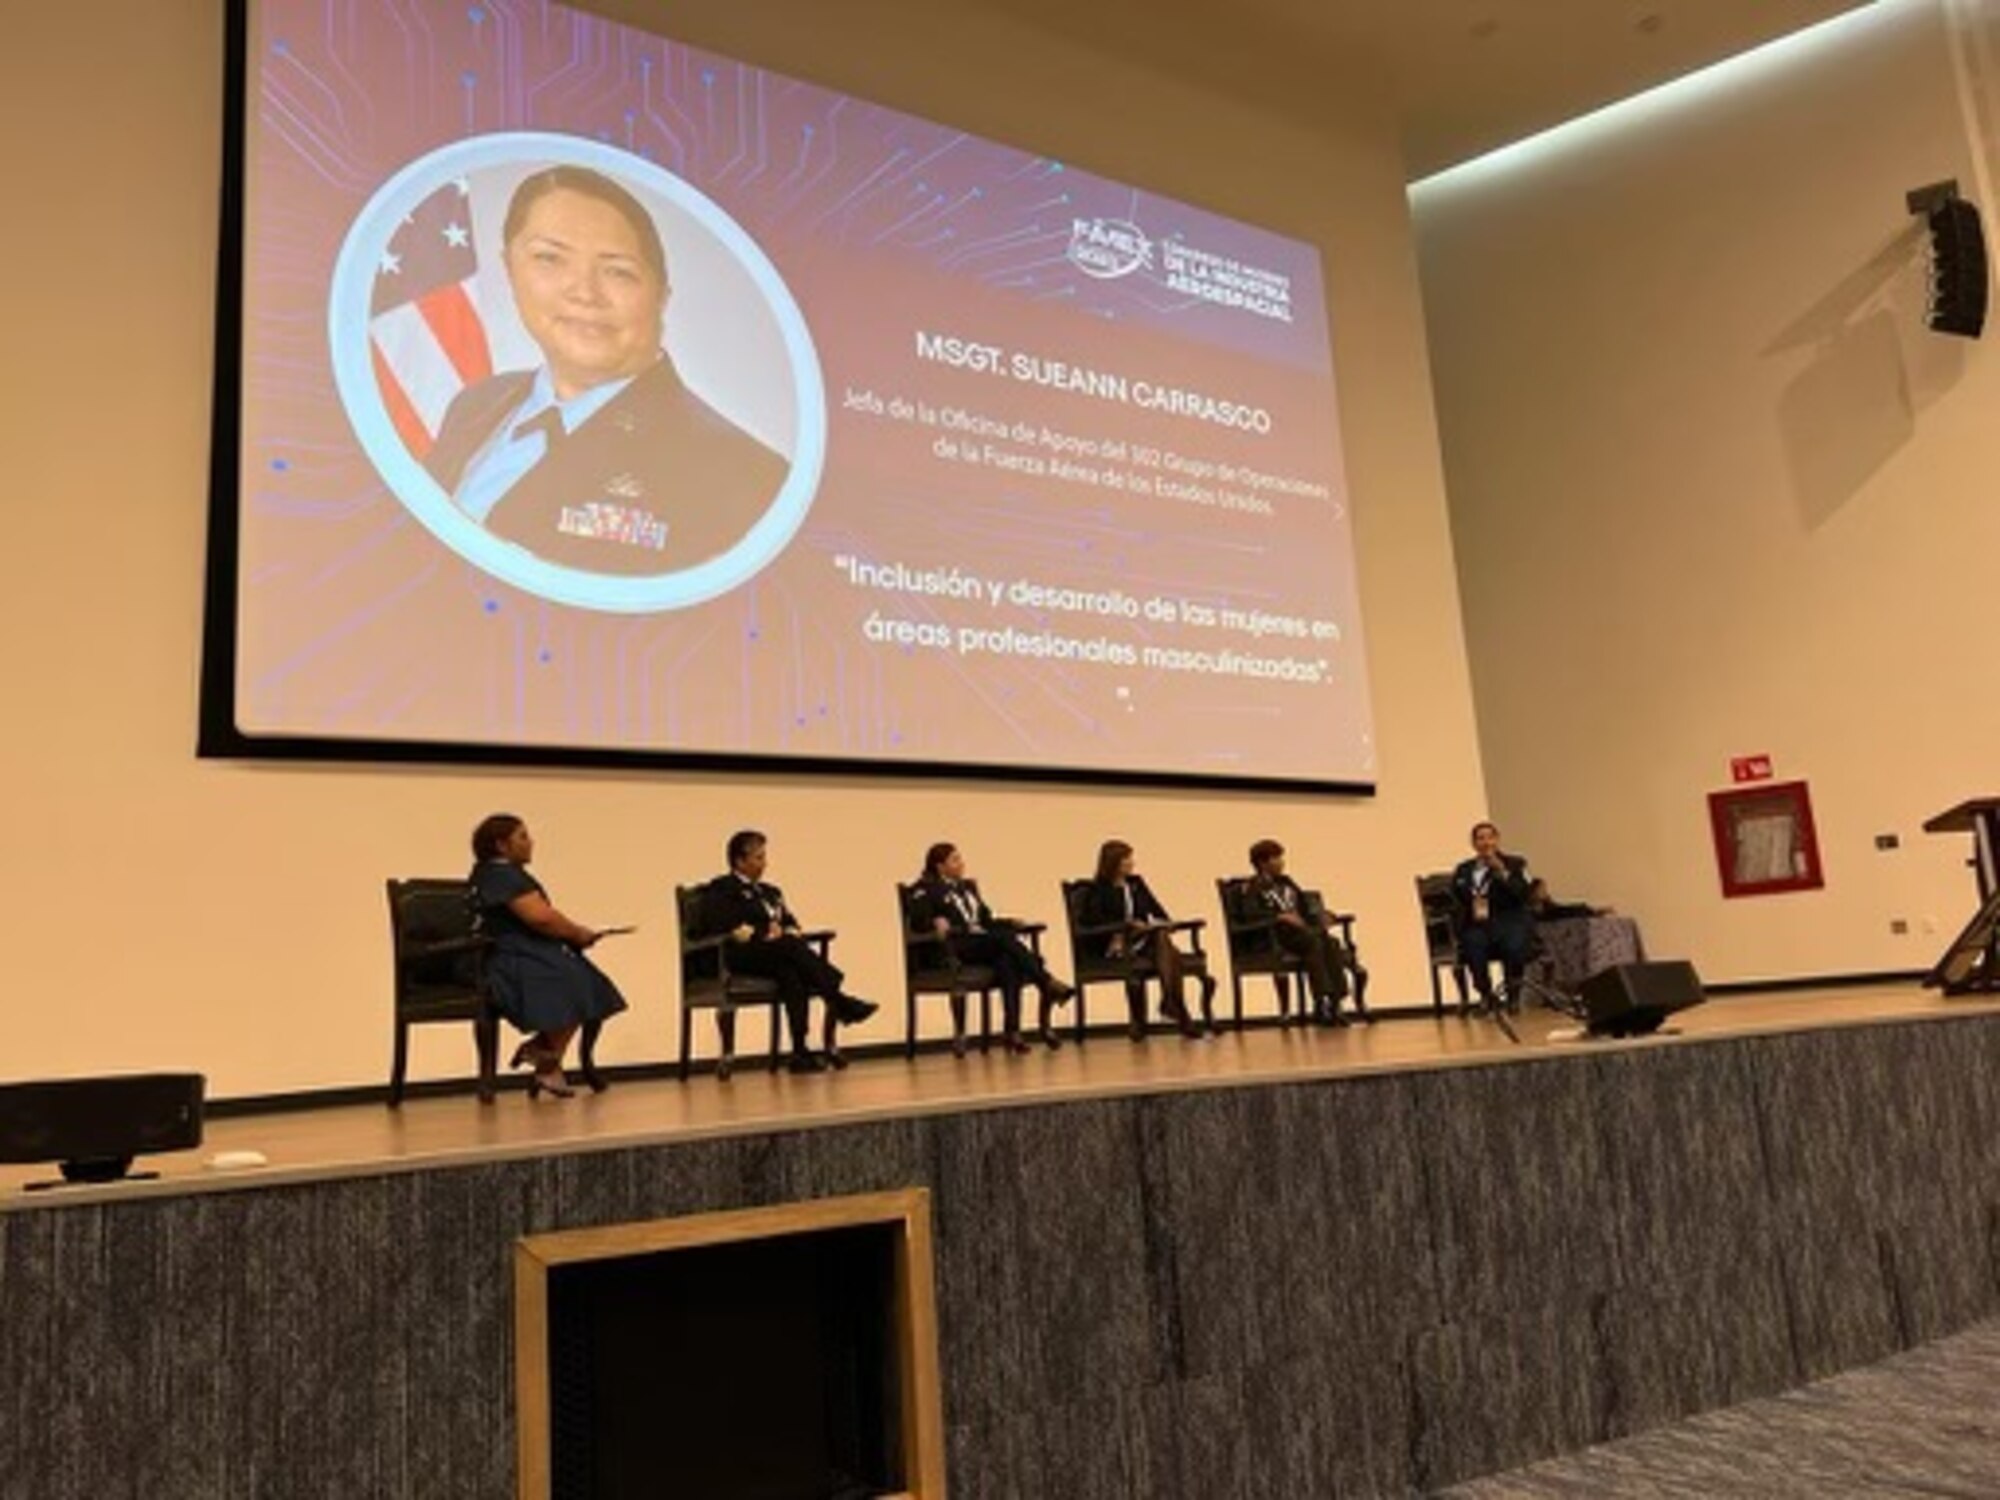 A row of panelists speaks on a stage with a screen behind them displaying a portrait of one of the speakers, Master Sgt. Sueann Carrasco.